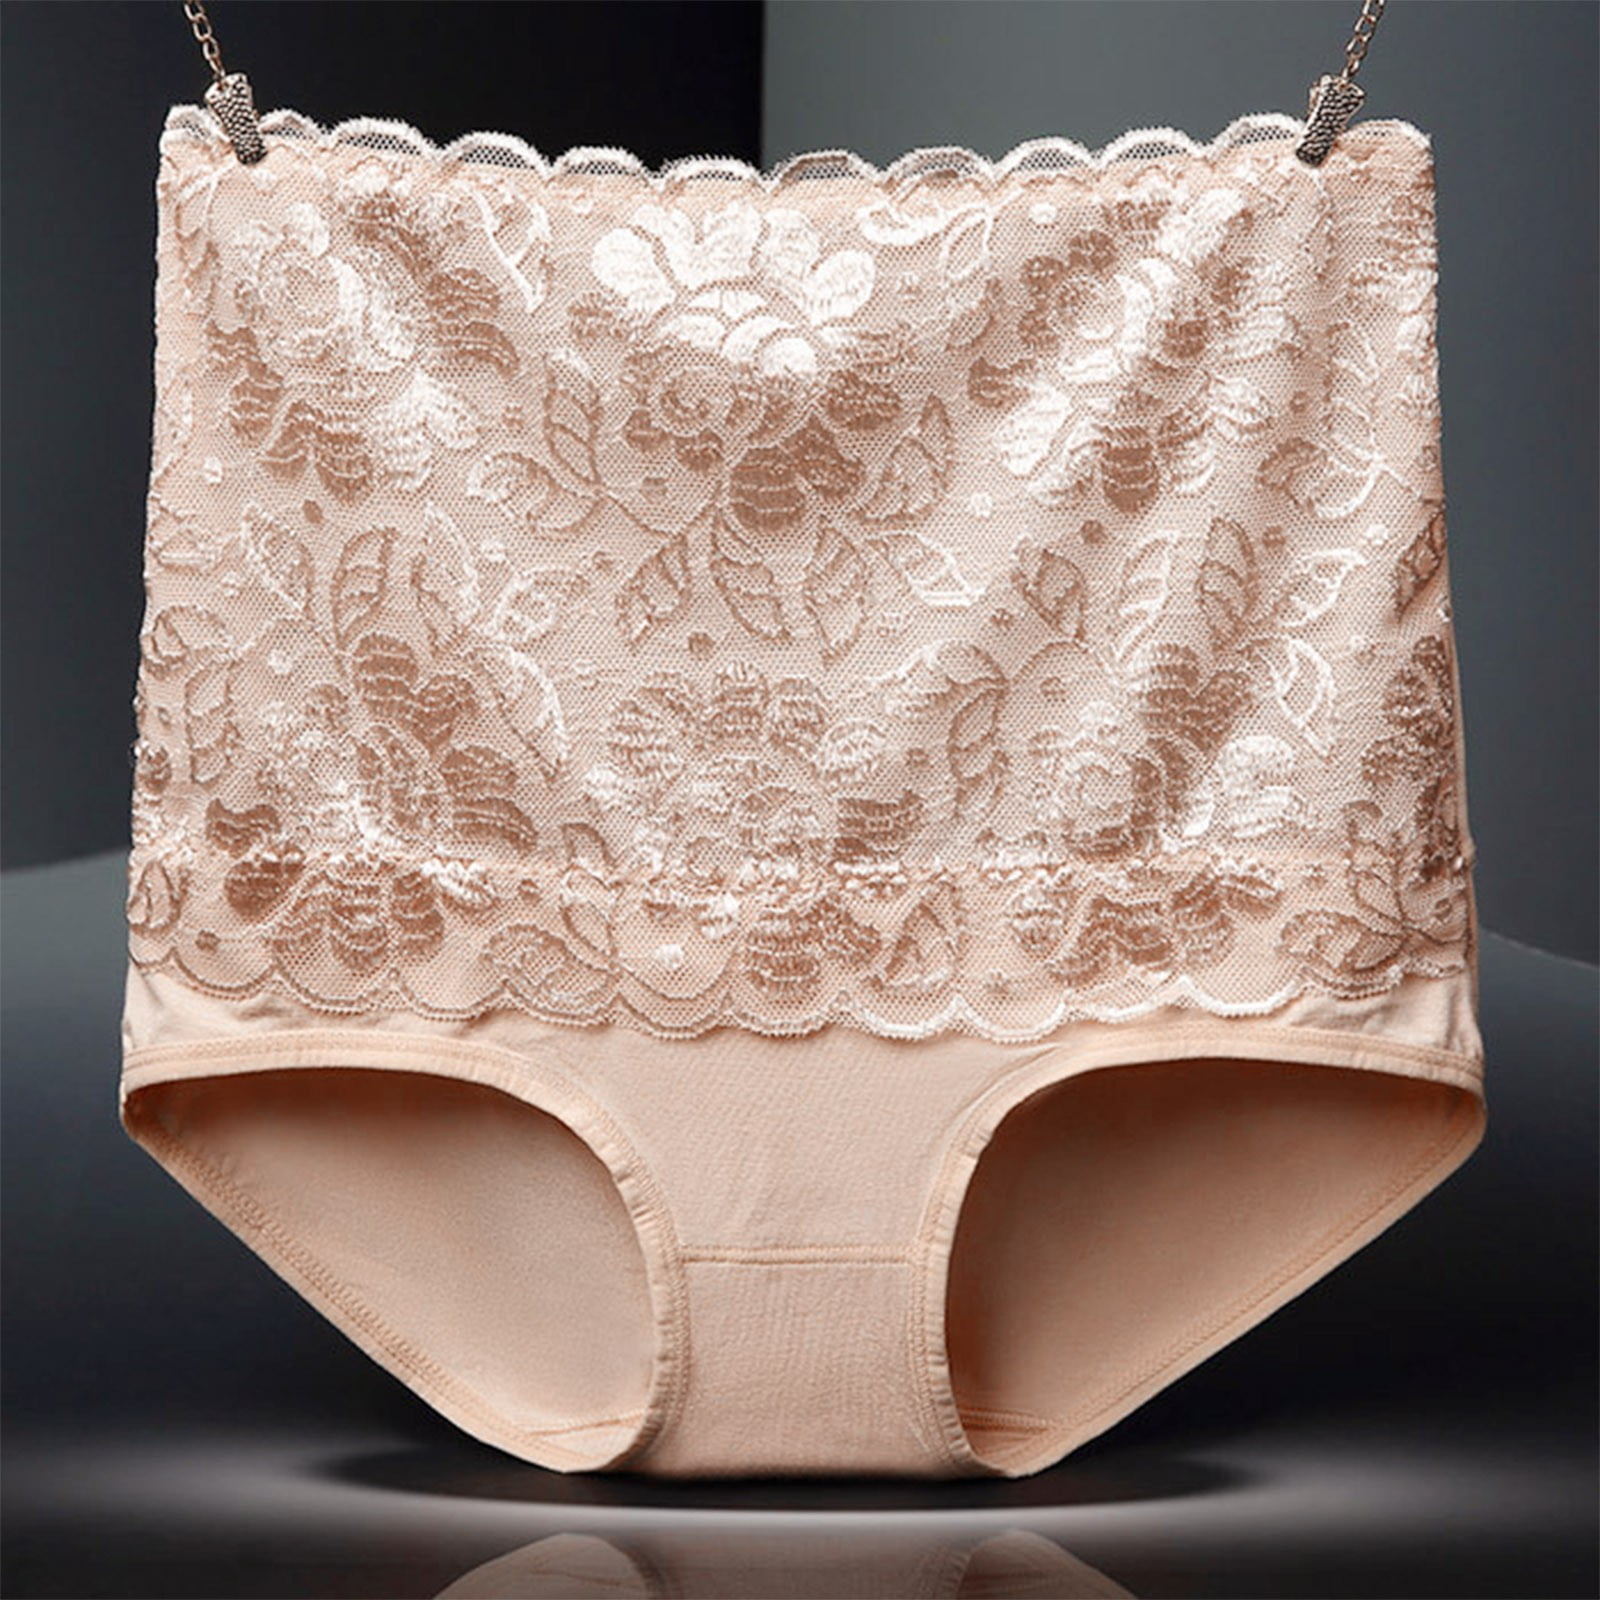 Compre Daily Update Plus Size Women's Lace Cotton Underwear High Waist Sexy  Panties With Soft Breathable 100% Cotton Liner Uokin A6080 y Women S Lace Underwear  High Waist Sexy Panties de China